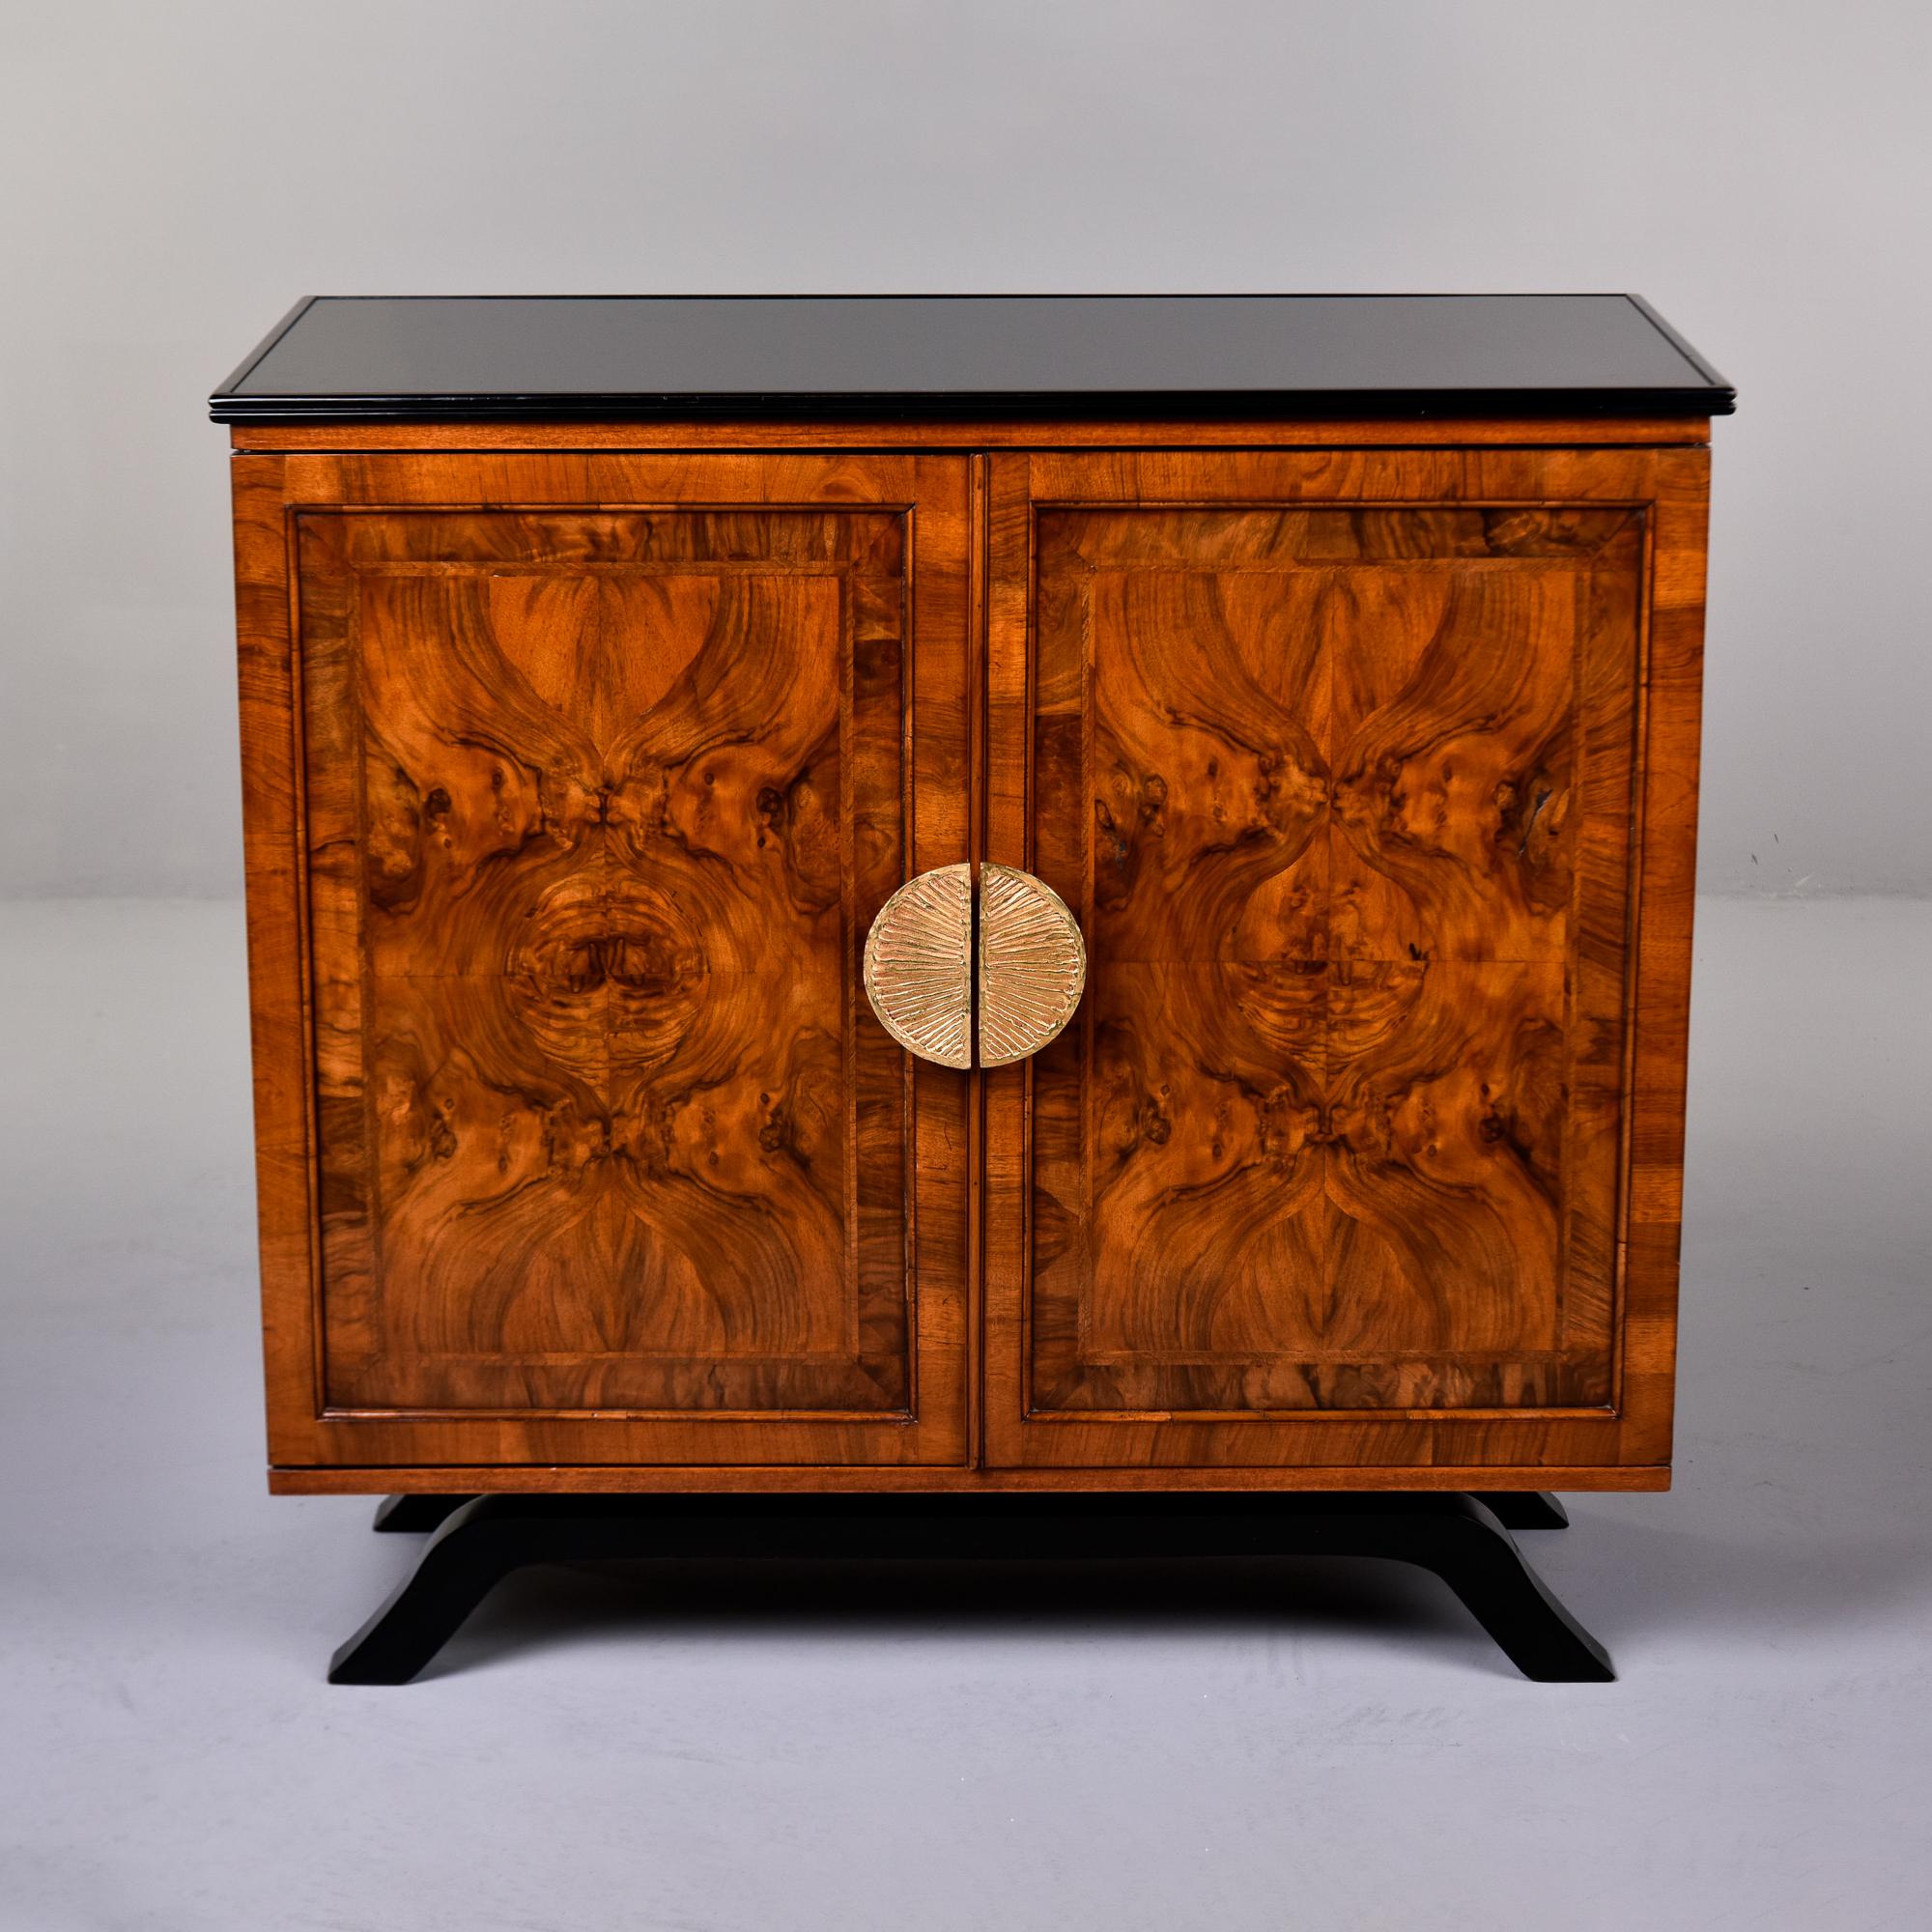 Found in France, this burl elm two door cabinet dates from the 1930s. Black glass top, burl elm veneer on the front and sides, original decorative brass handles and black footed base. Interior has adjustable shelves. Unknown maker. 

Very good